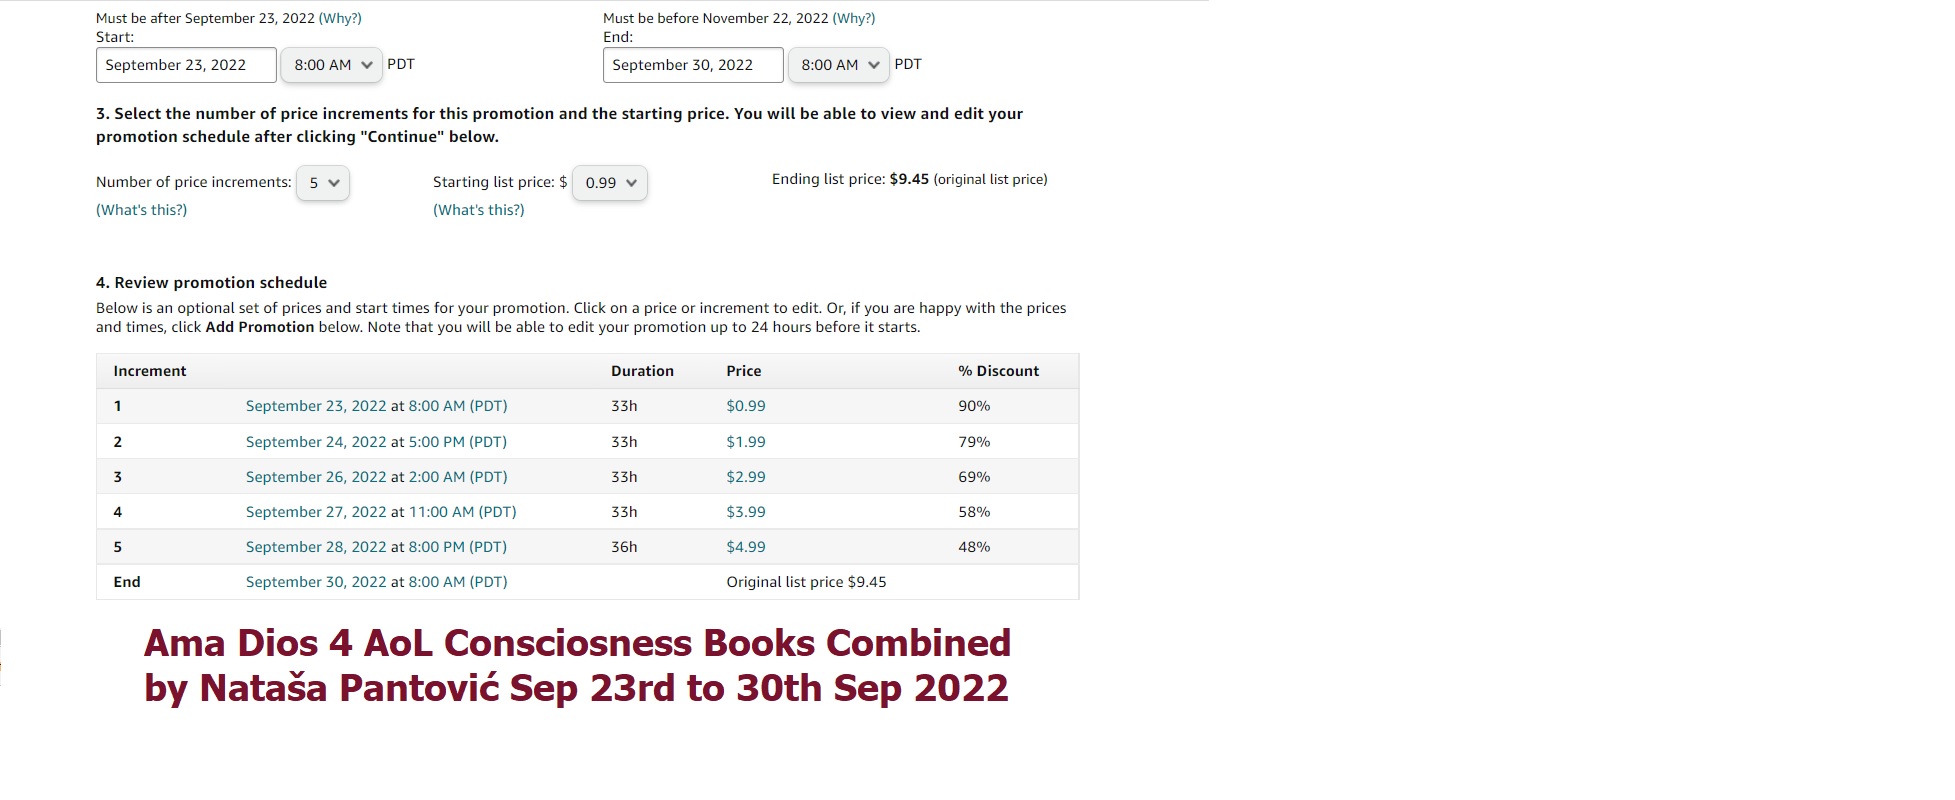 Ama Dios 4 AoL Consciousness Books by AoL Malta Promotion Schdule Sep 2022 for Autumn Equinox Business Women Daz and National Fitness Discount schedule